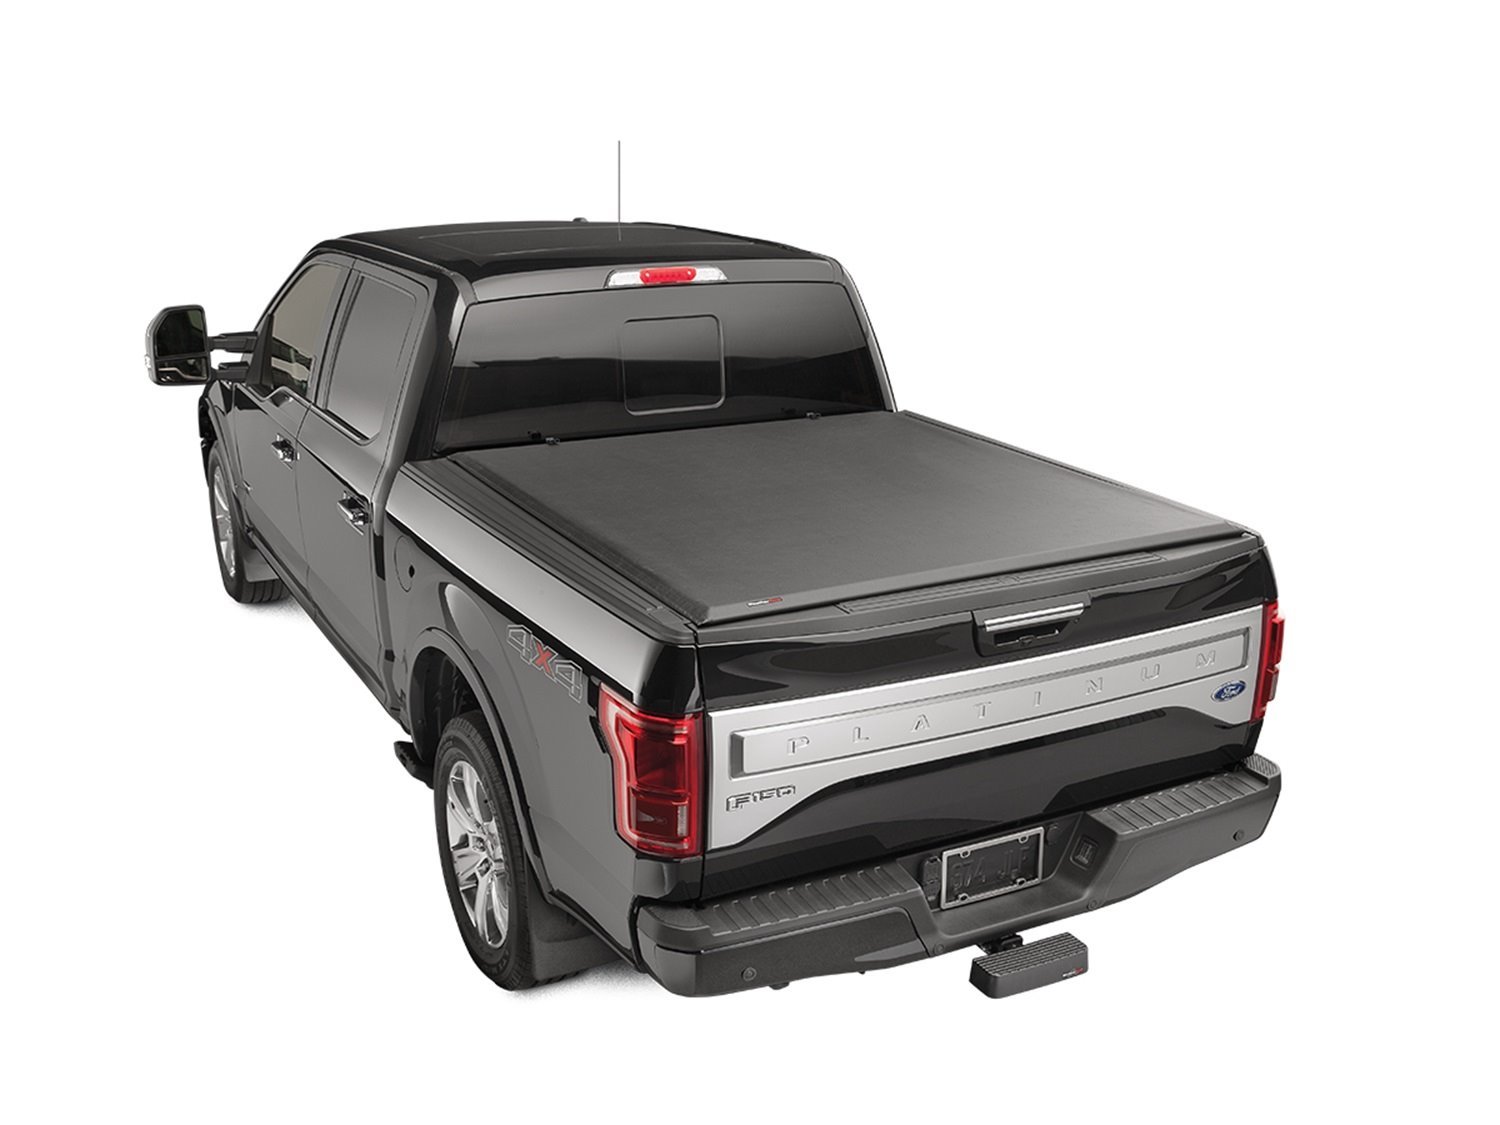 ROLL UP TRUCK BED COVER B TOYOTA TUNDRA 2007-2017 TUNDRA 6 6 BED W/O DECK RAIL